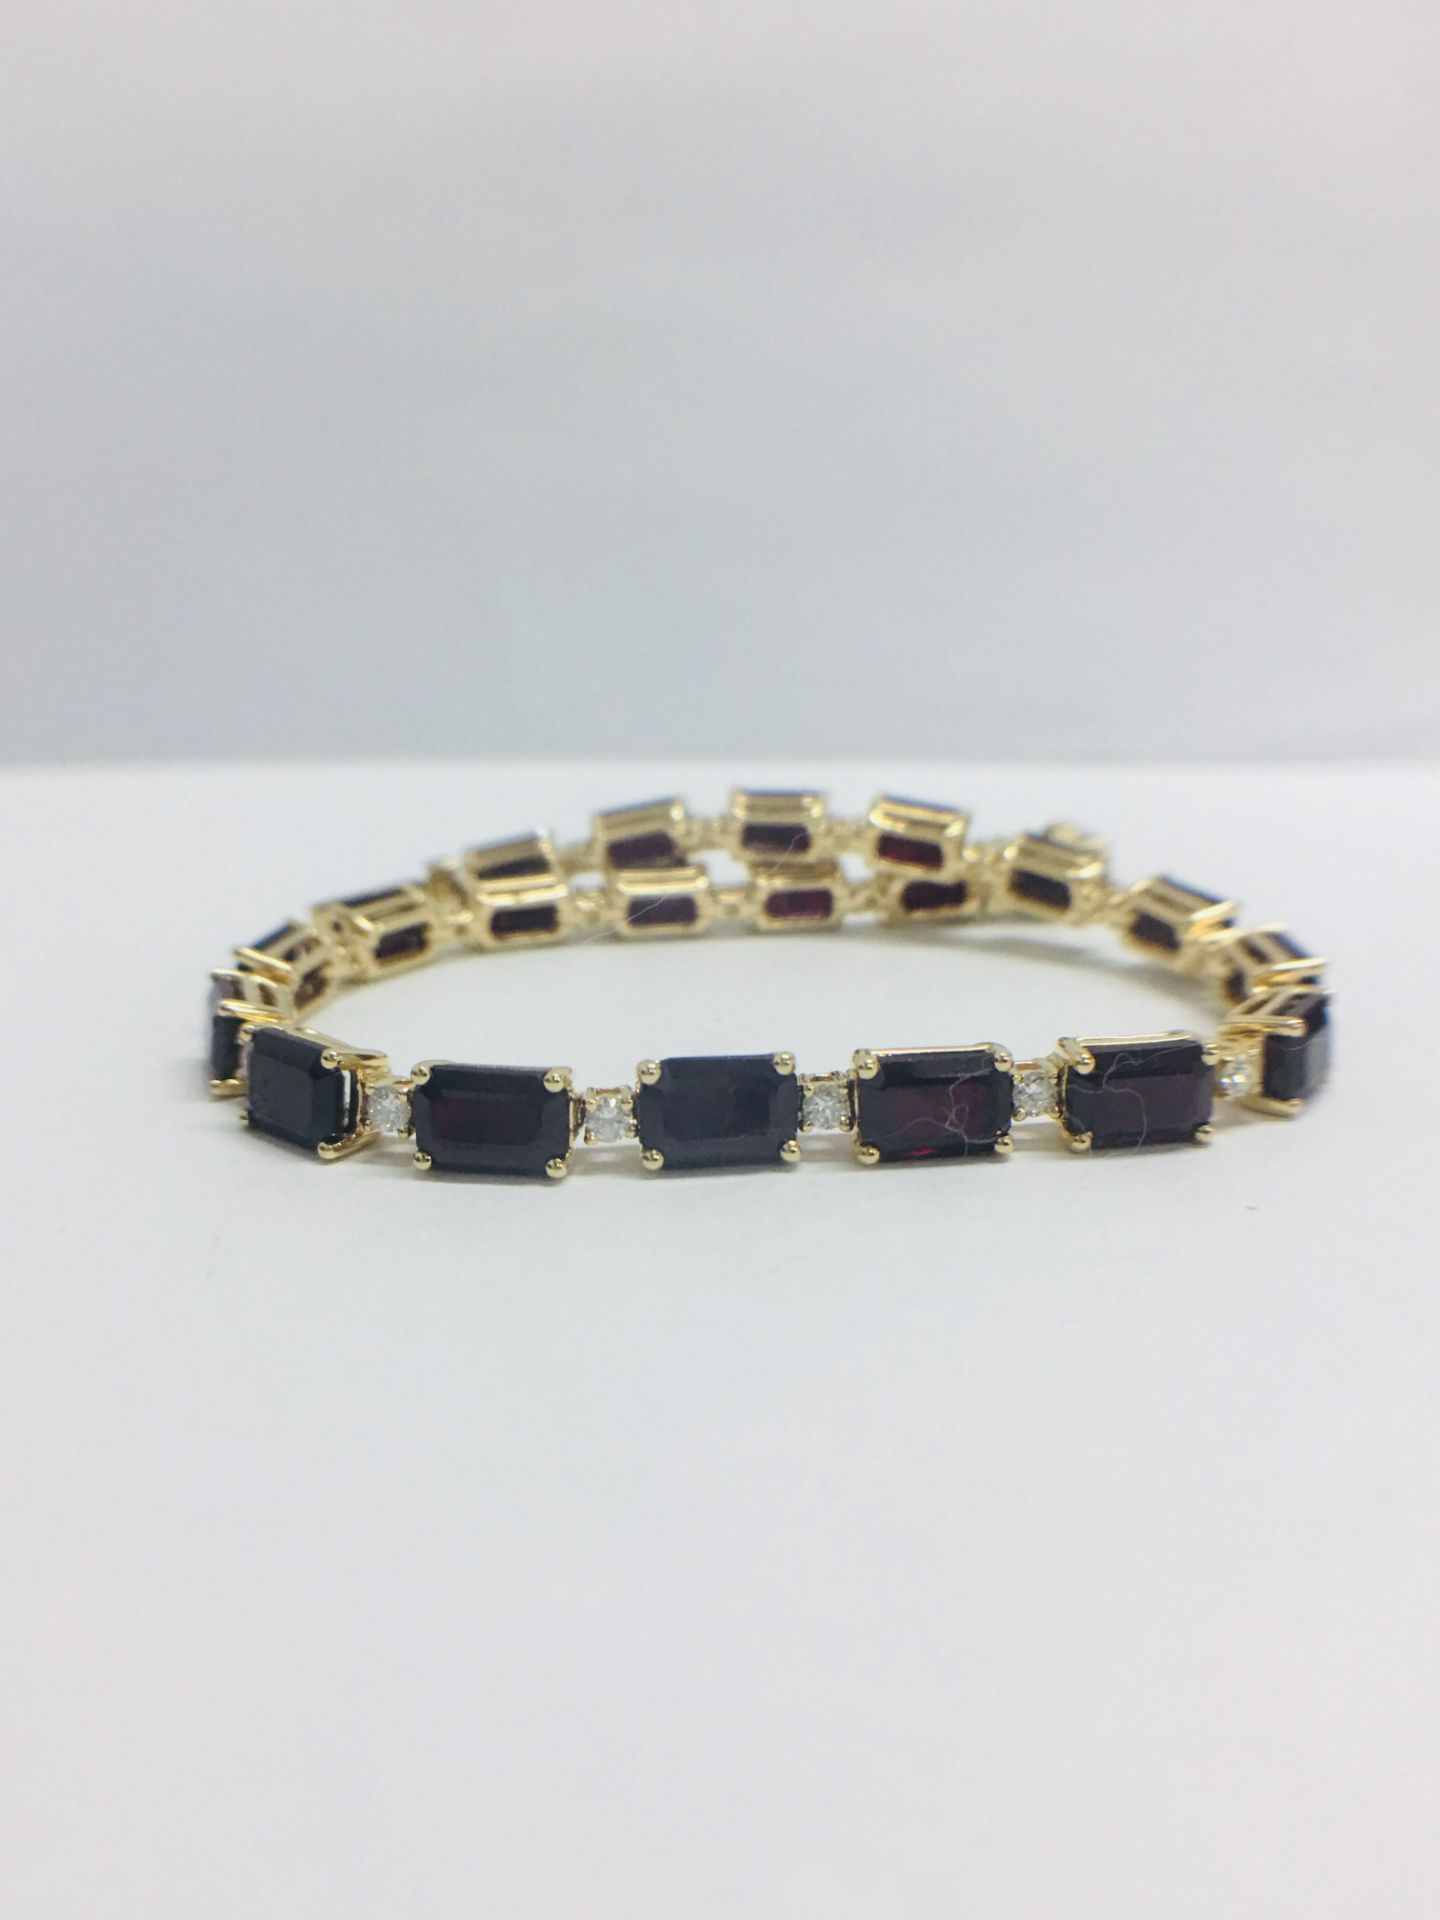 18ct Yellow Gold Ruby and Diamond Tennis Bracelet - Image 9 of 10